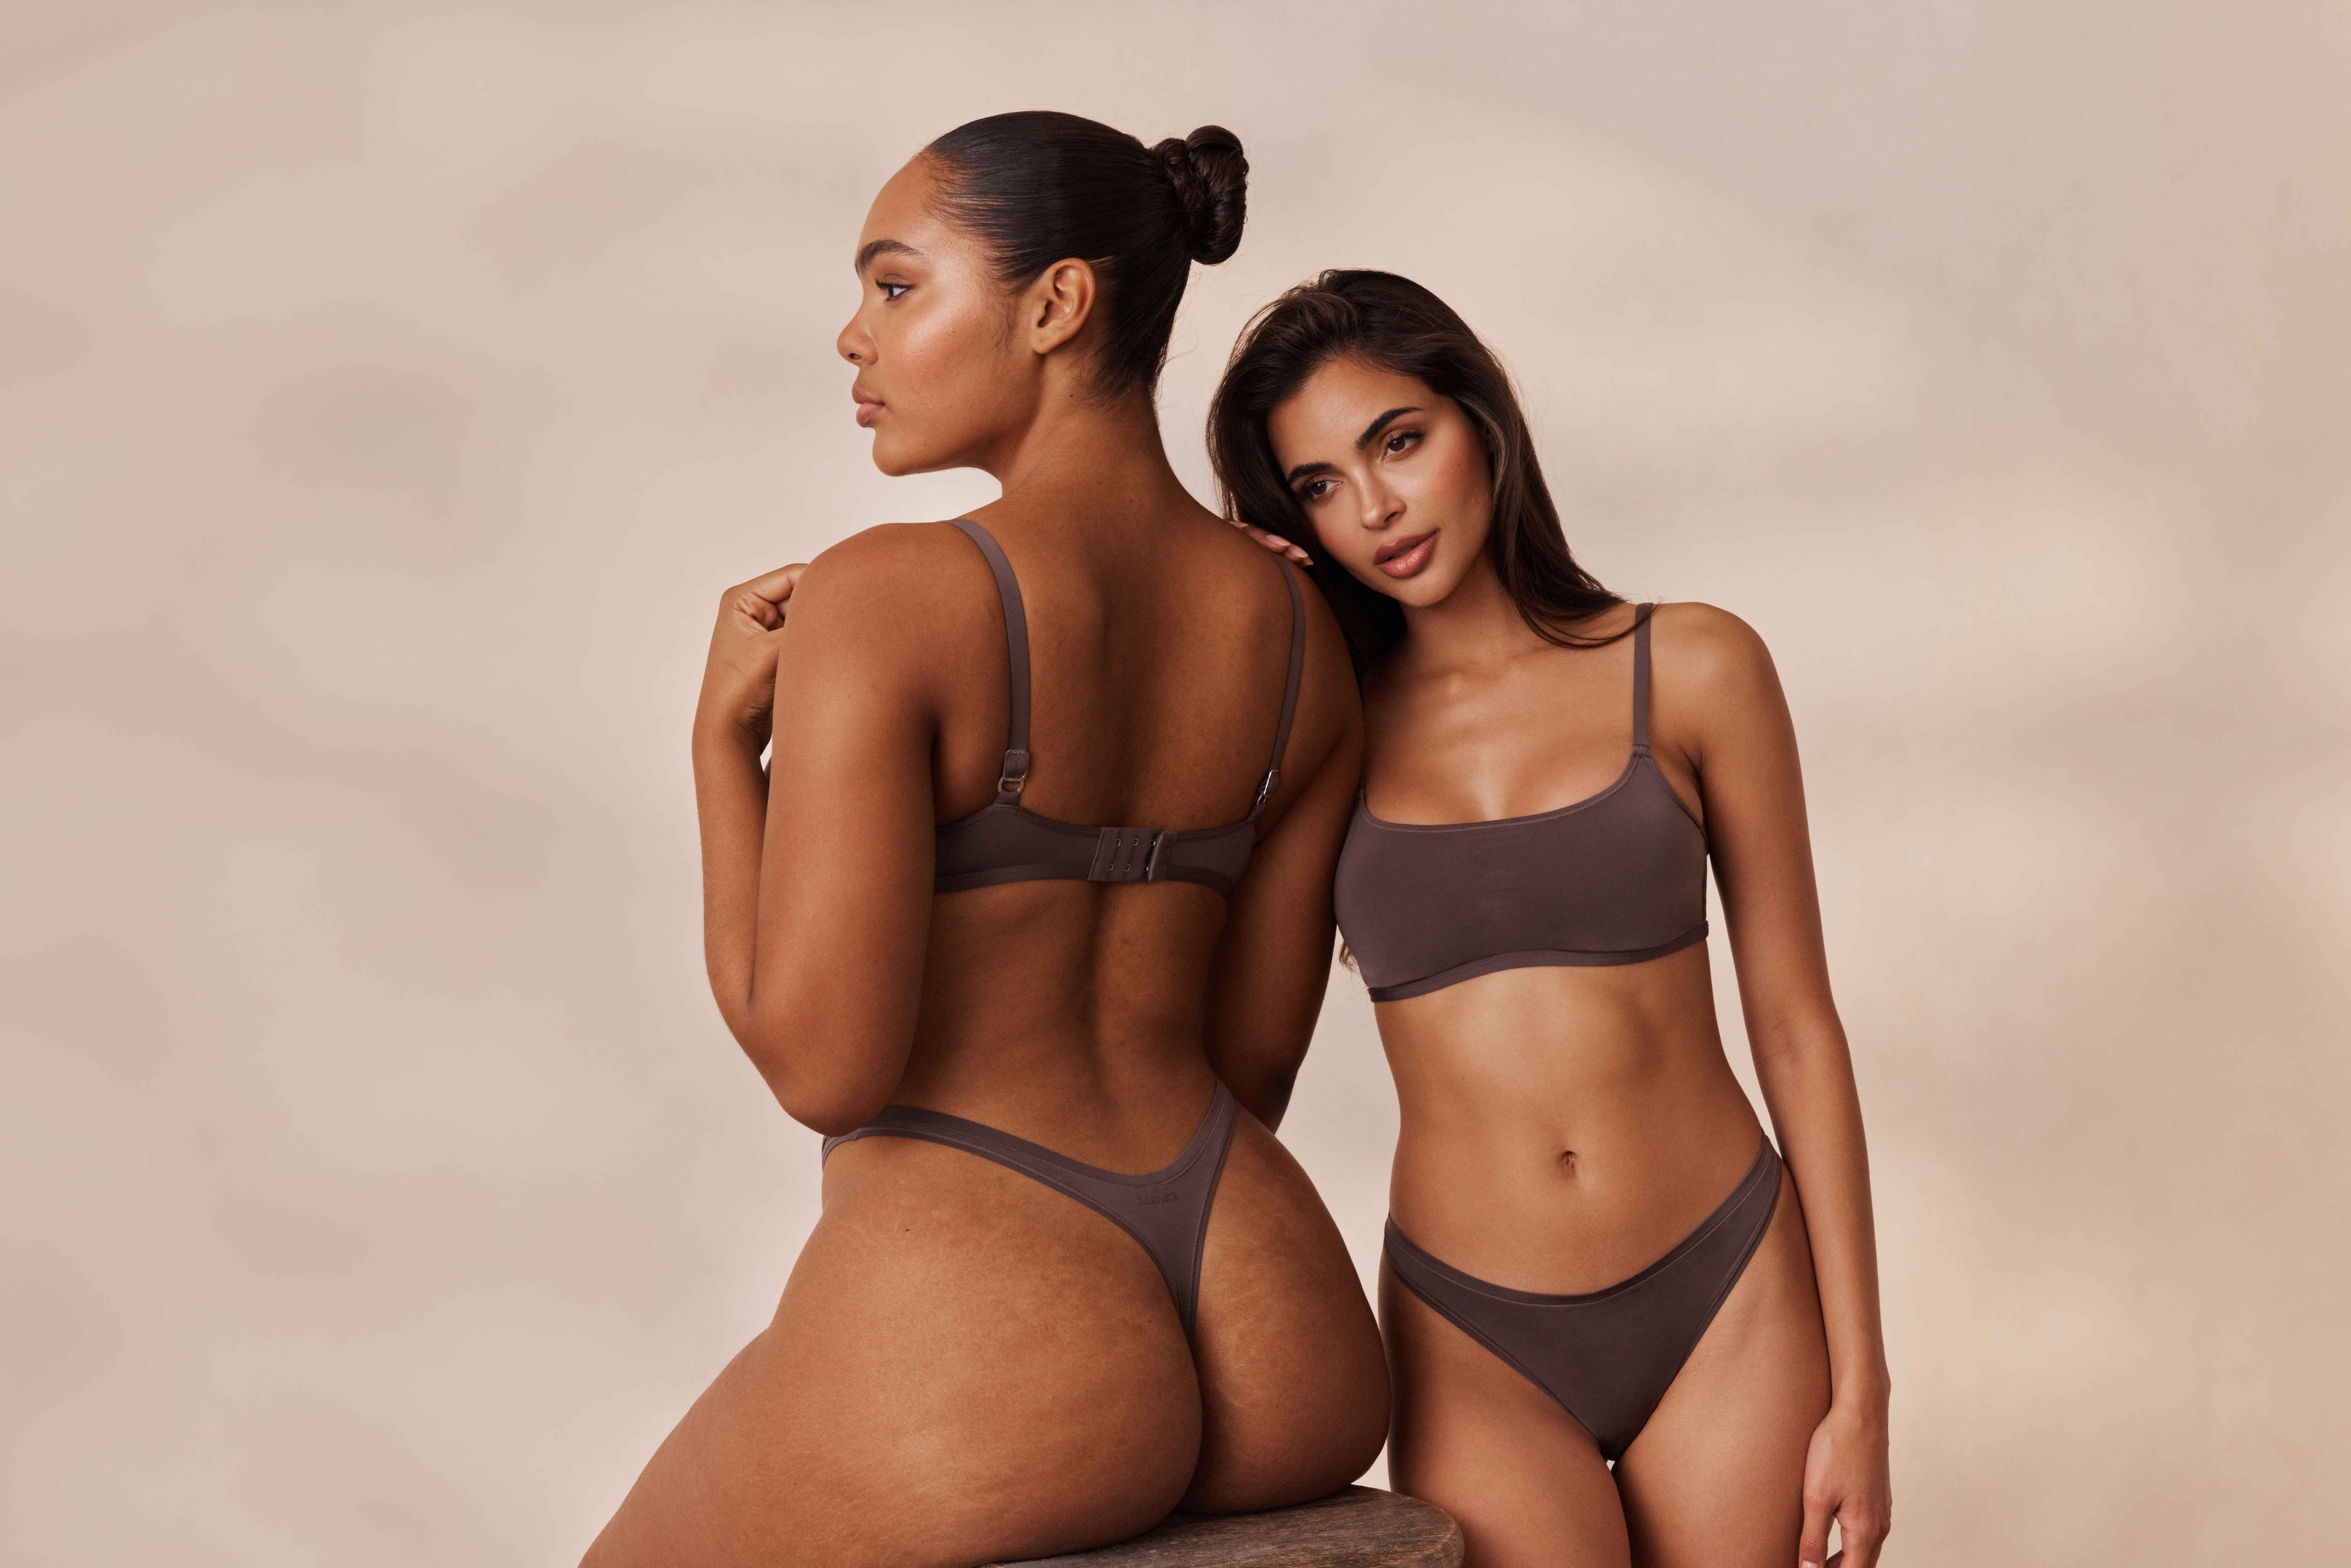 The return of a divisive lingerie brand